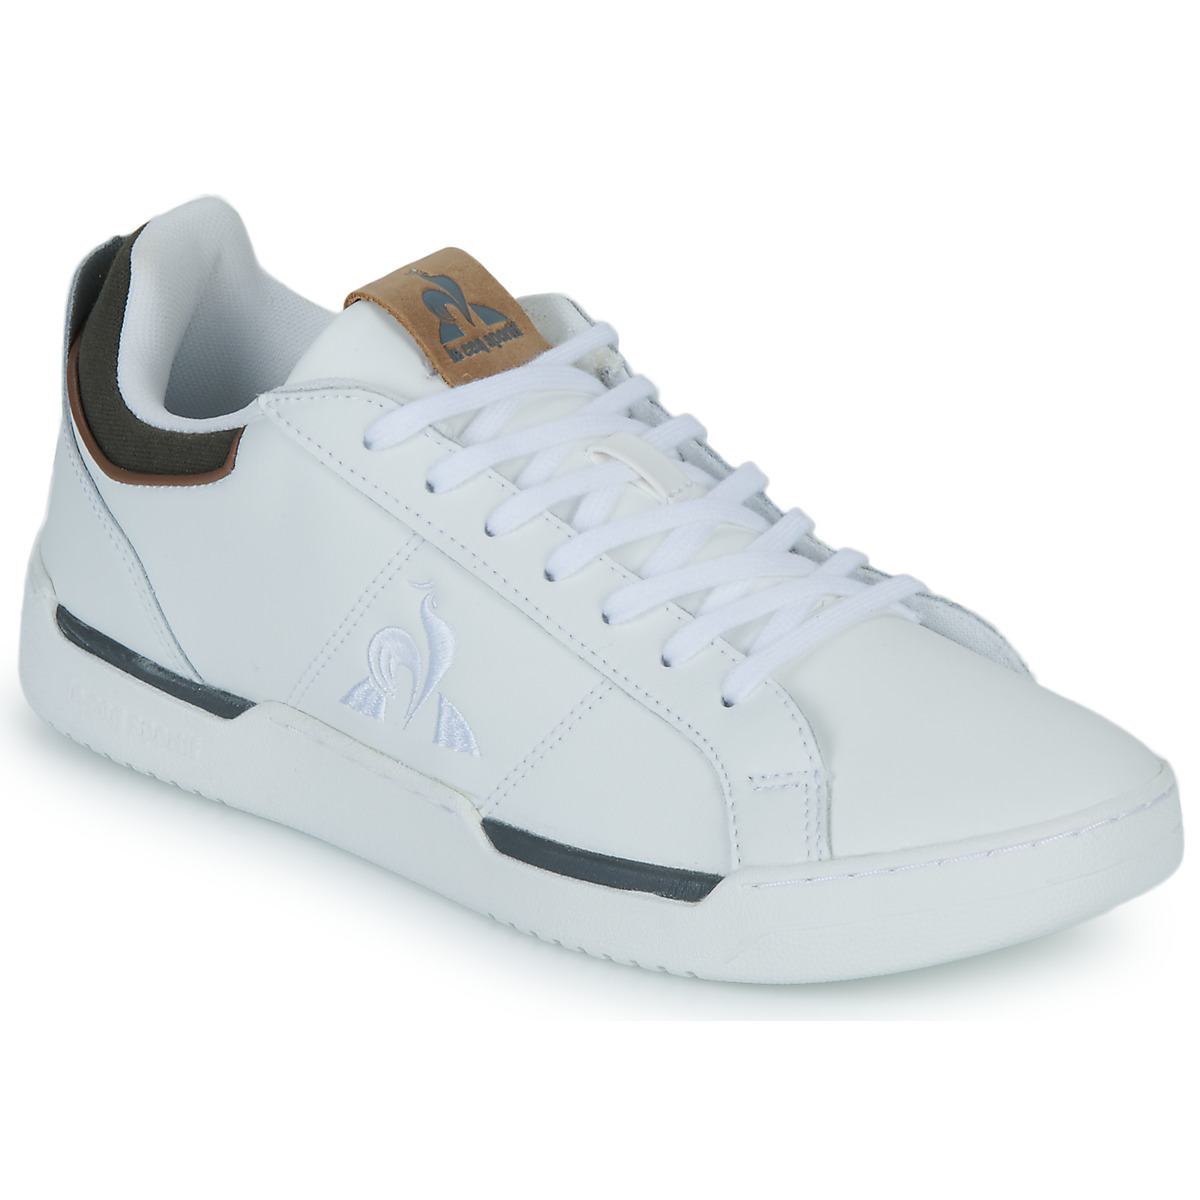 Le Coq Sportif Men White Sneakers from Spartoo GOOFASH